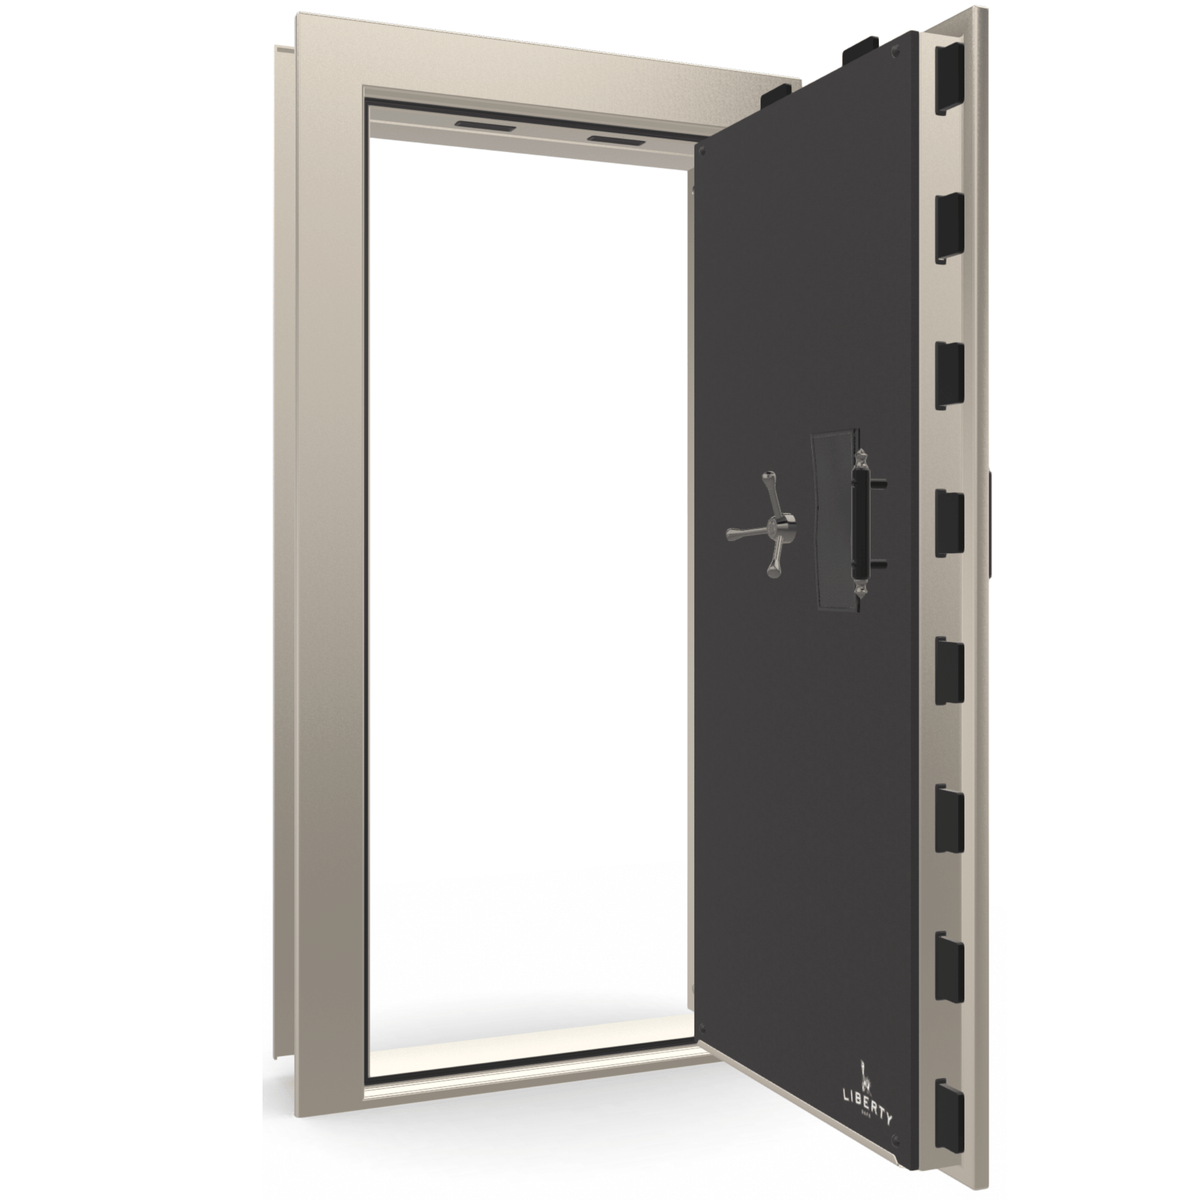 The Beast Vault Door in Champagne Gloss with Black Chrome Electronic Lock, Right Outswing, door open.